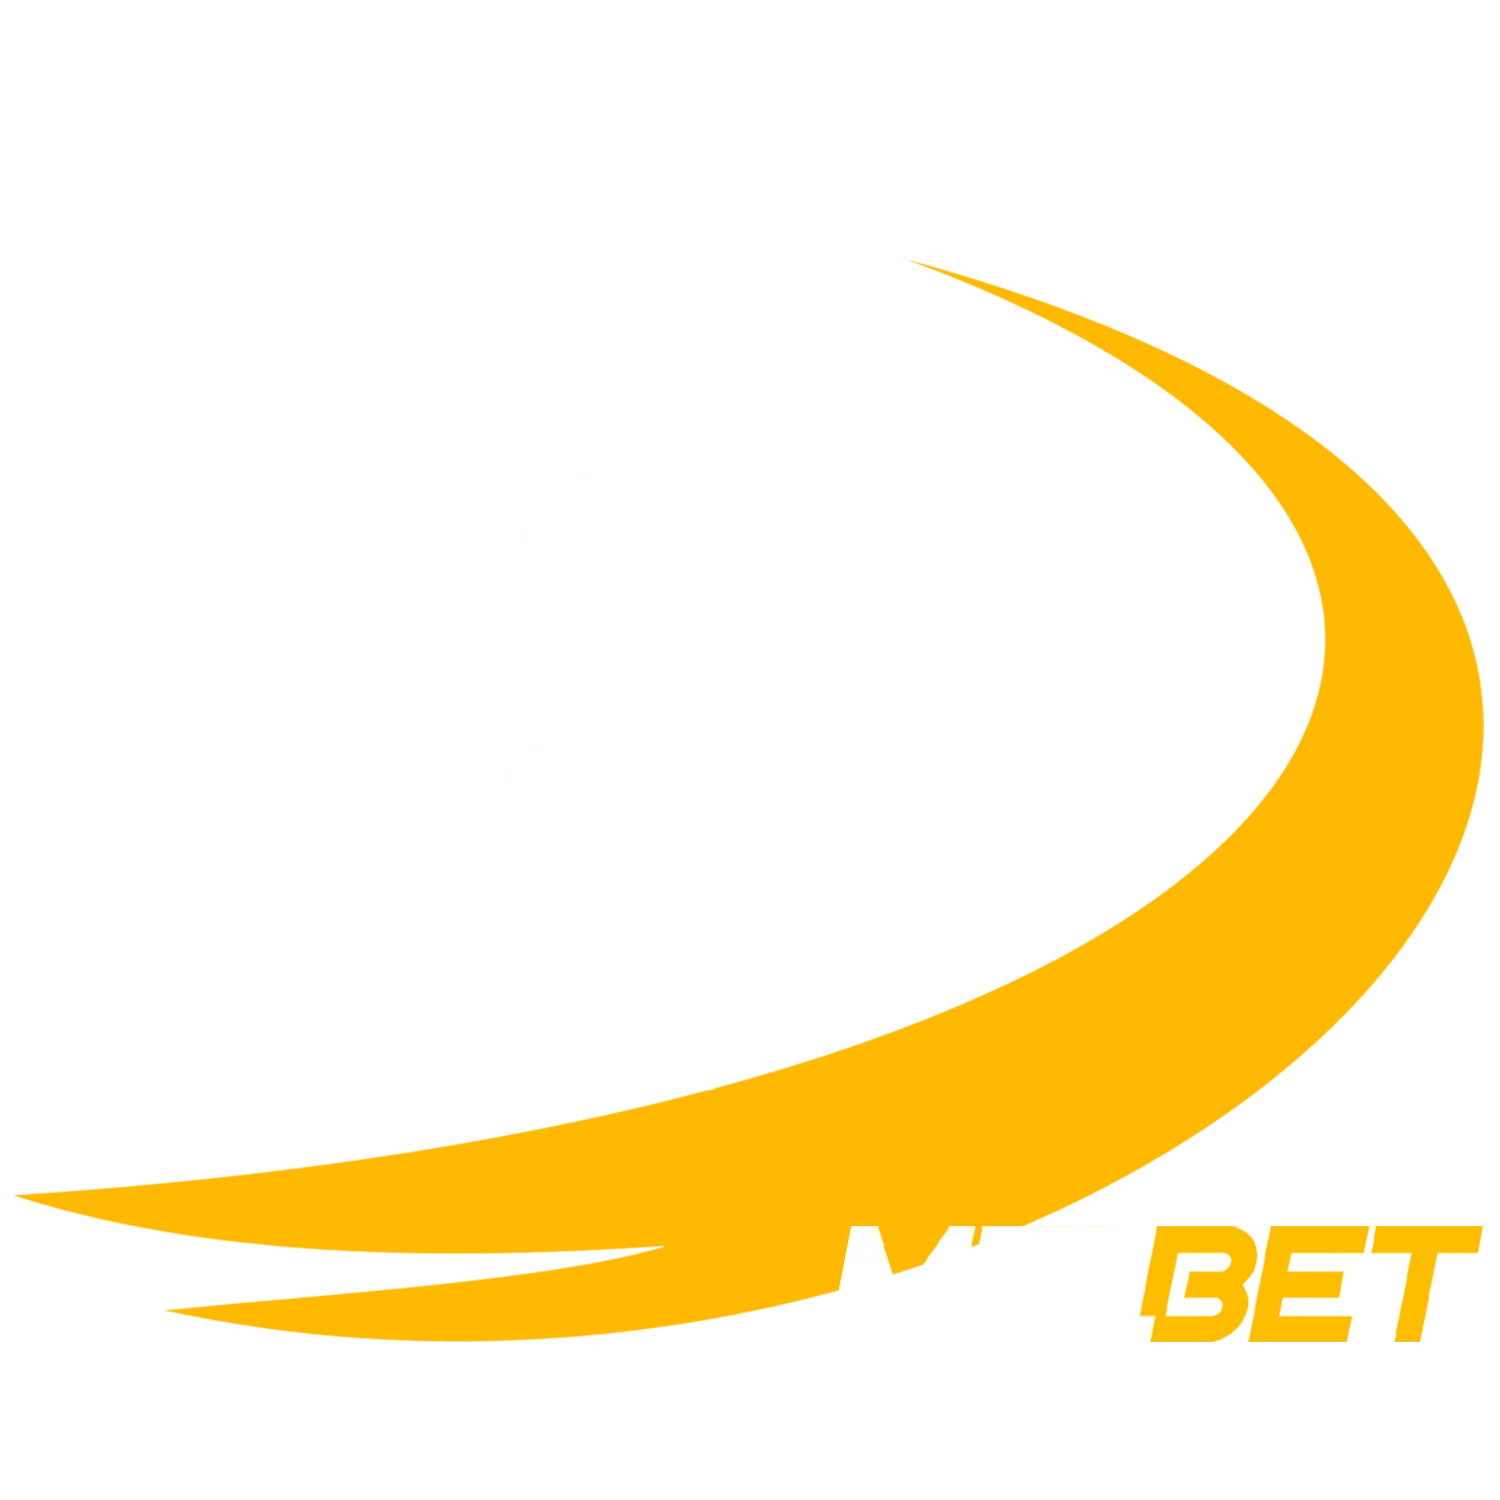 Learn about betting at Melbet and how to get the highest profit.